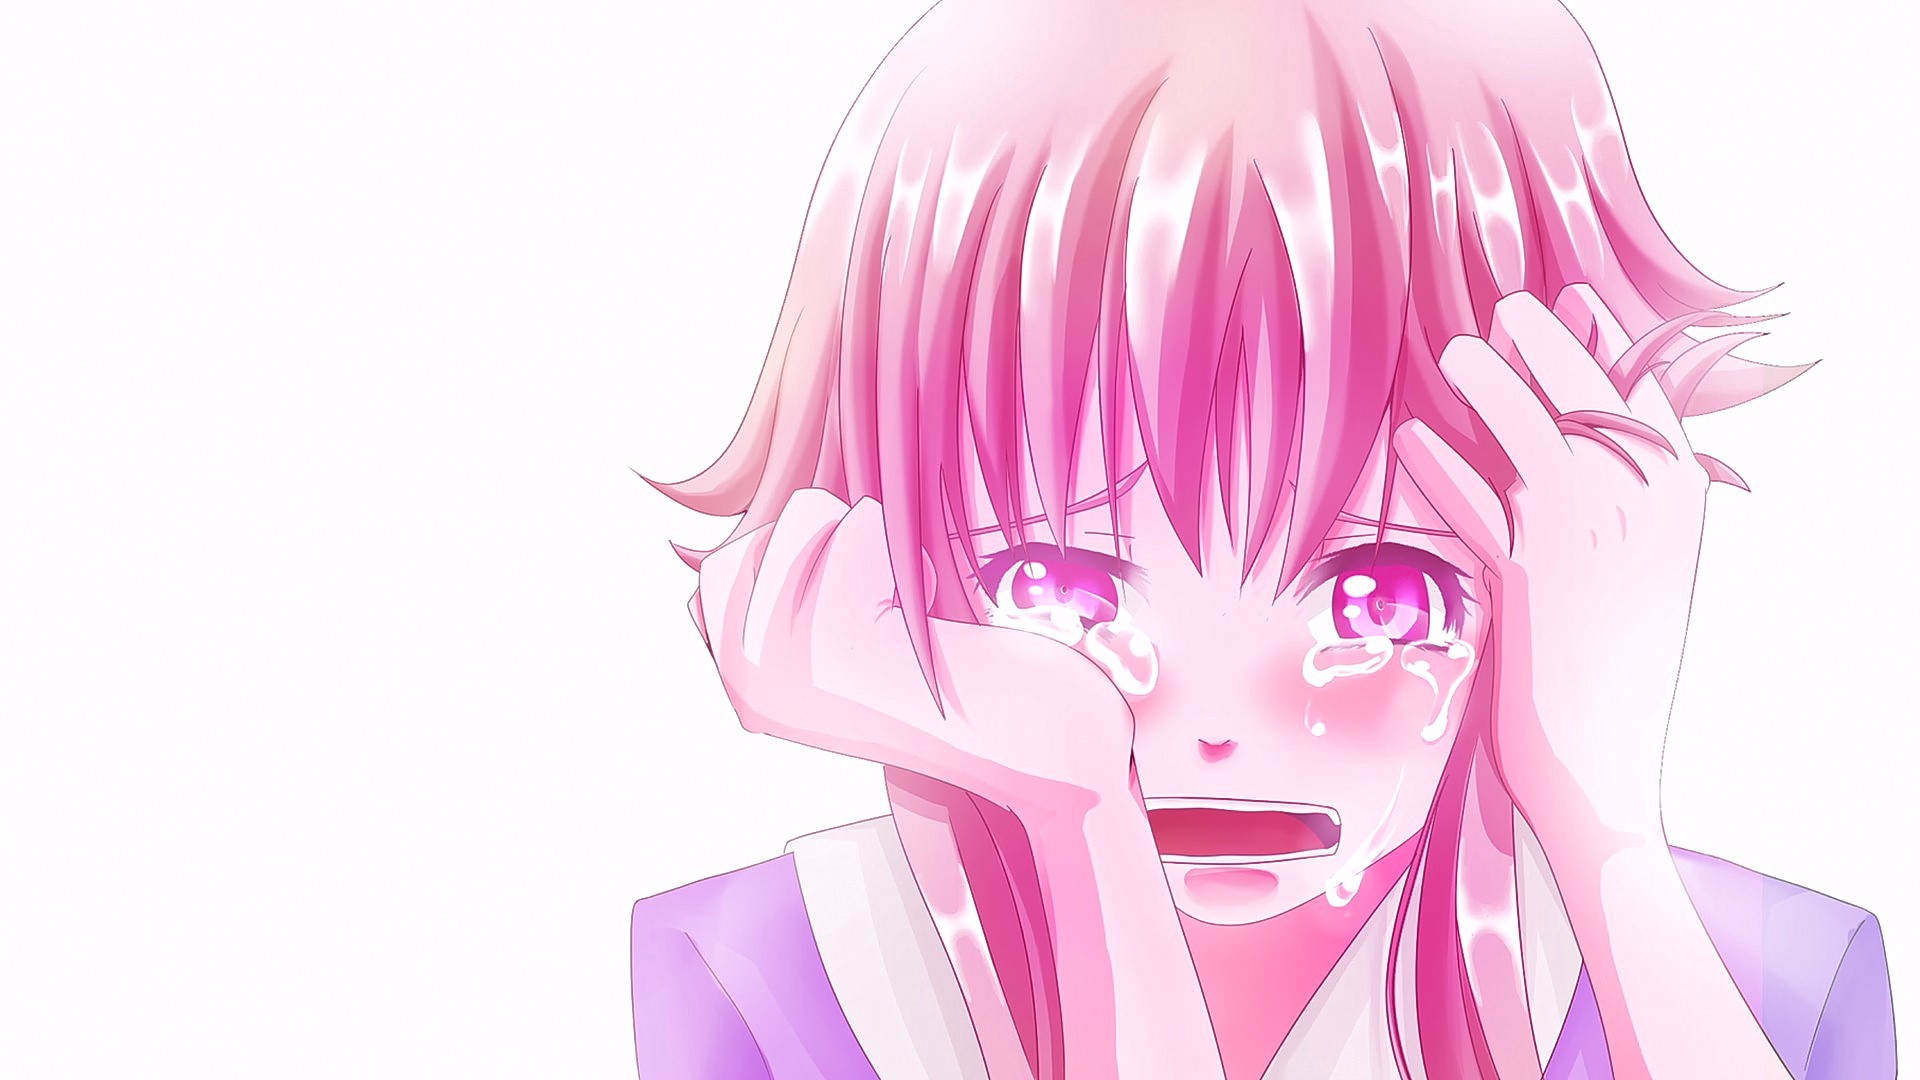 Anime Anime Girls White Background Pink Hair Sadness Crying Open Mouth Pink Eyes Short Hair Looking  1920x1080